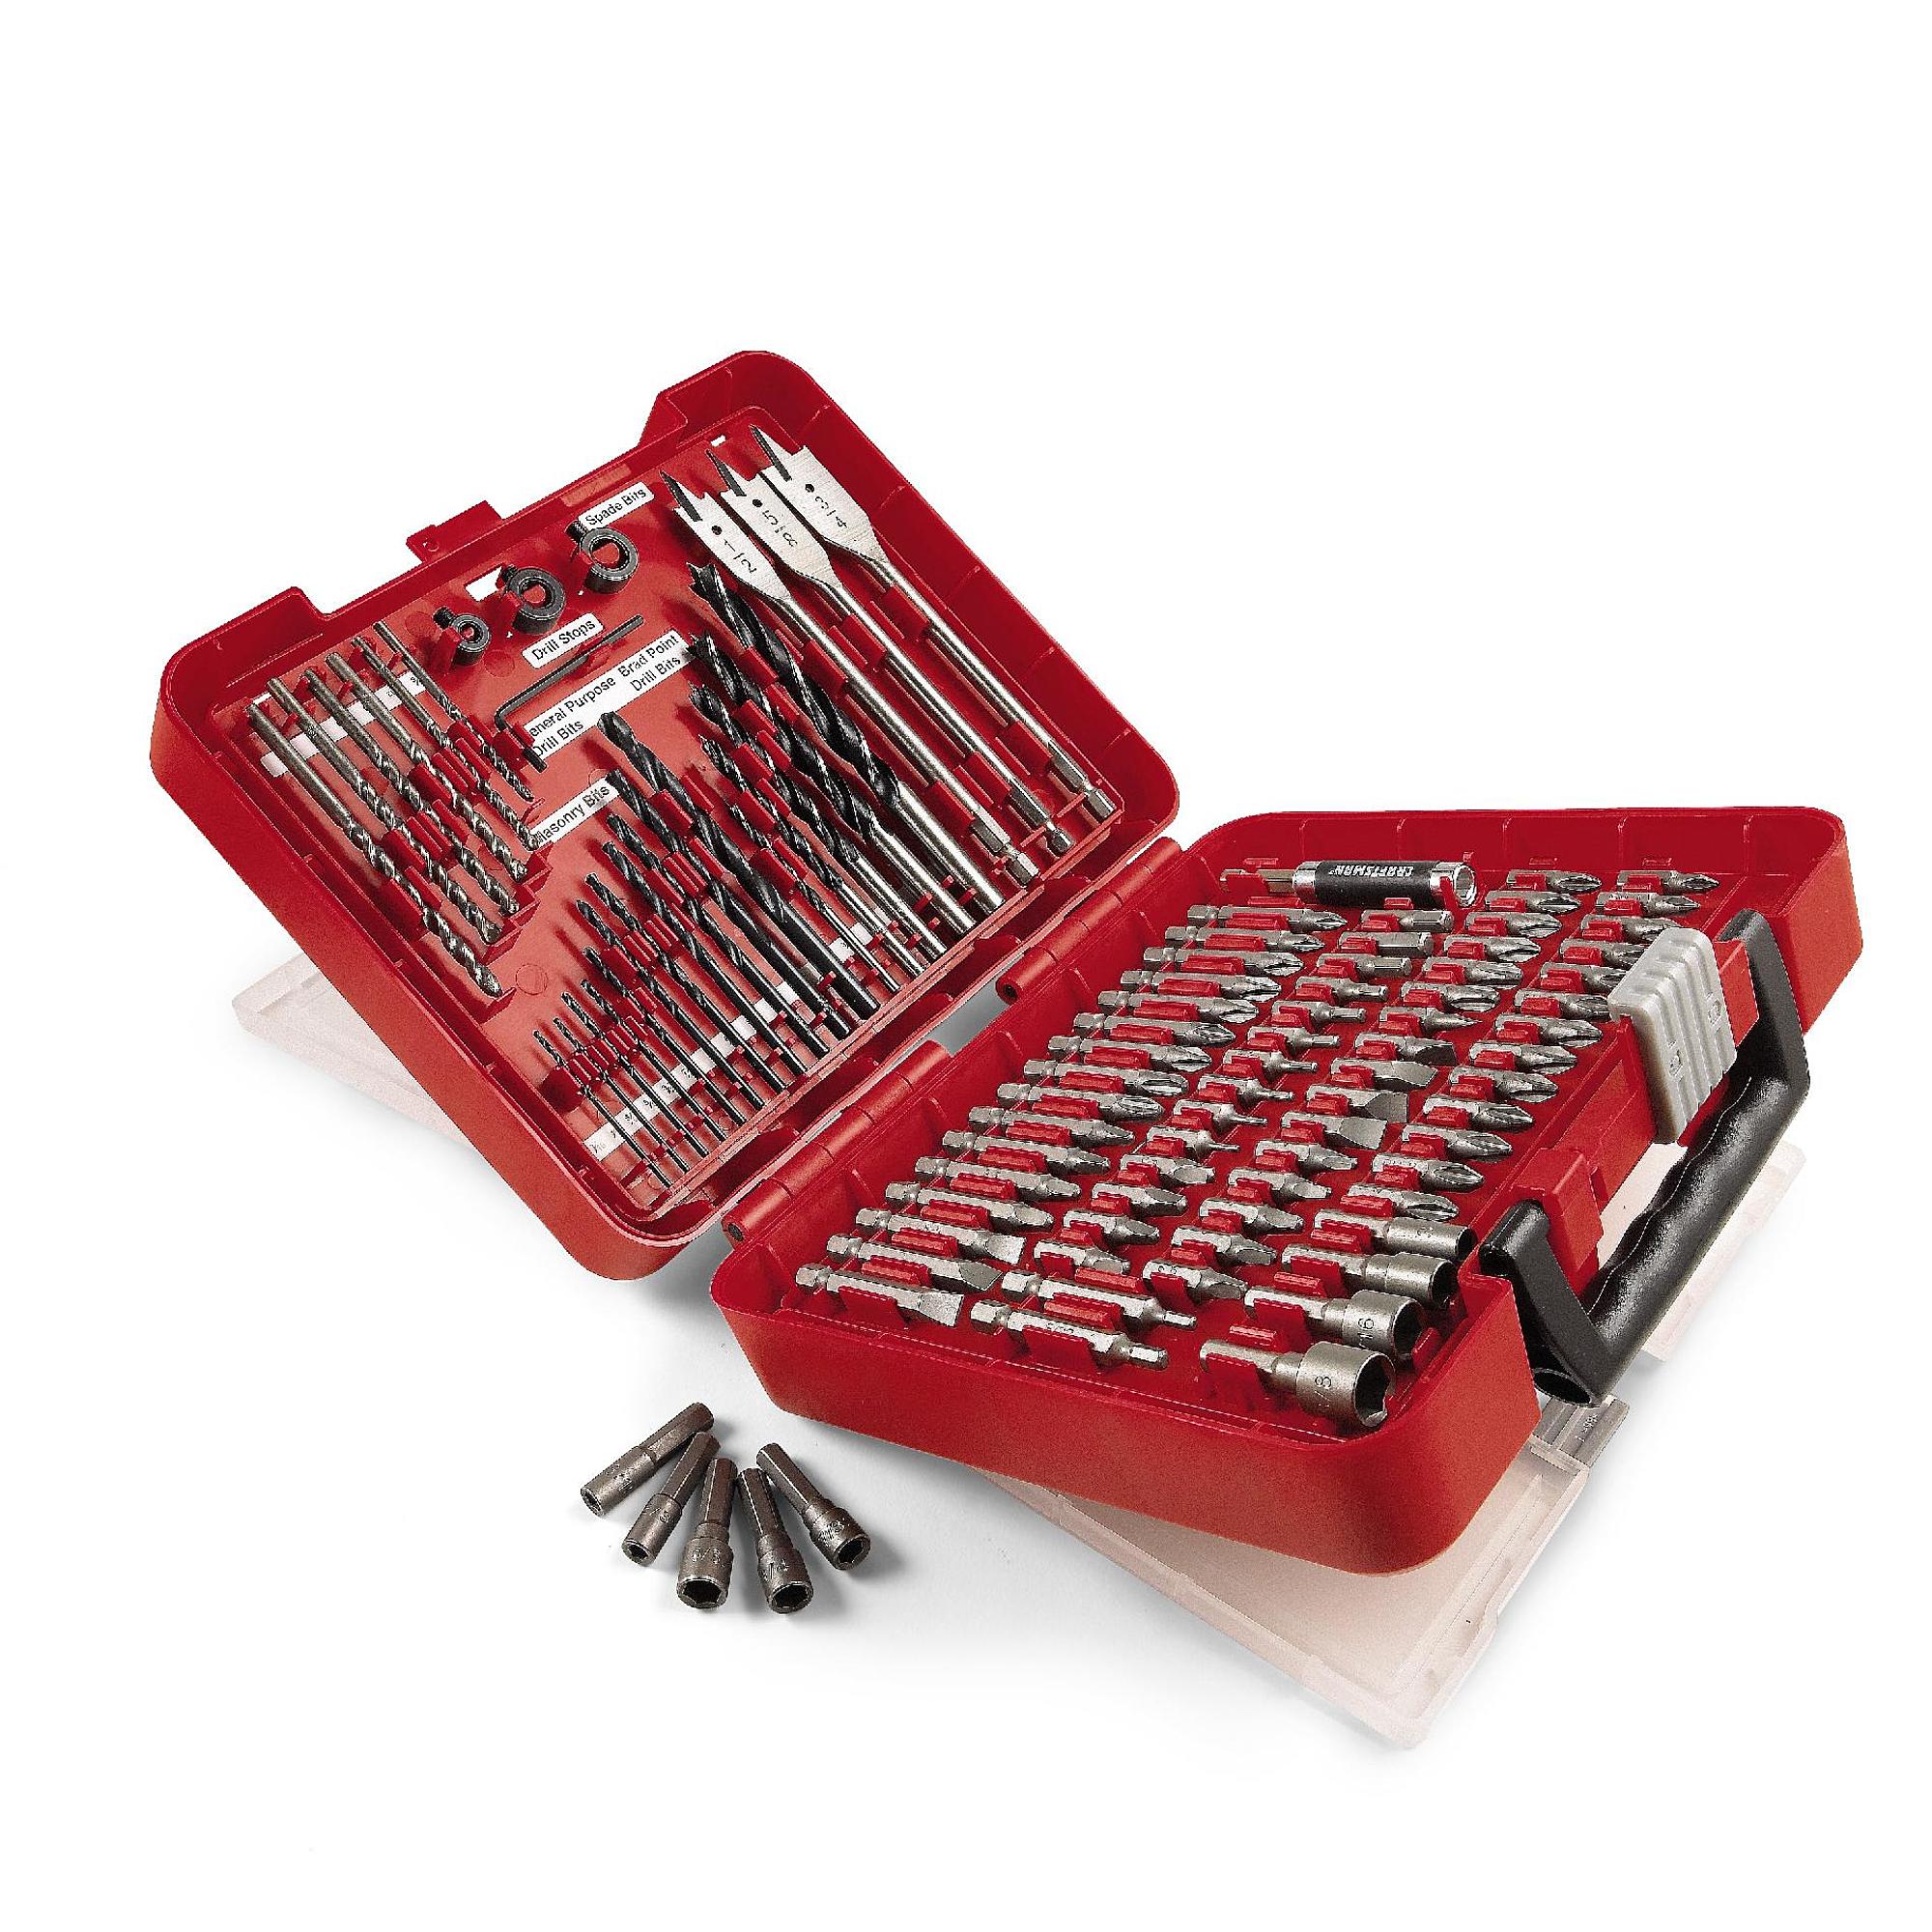 Craftsman 100-piece drill bit accessory kit for $15